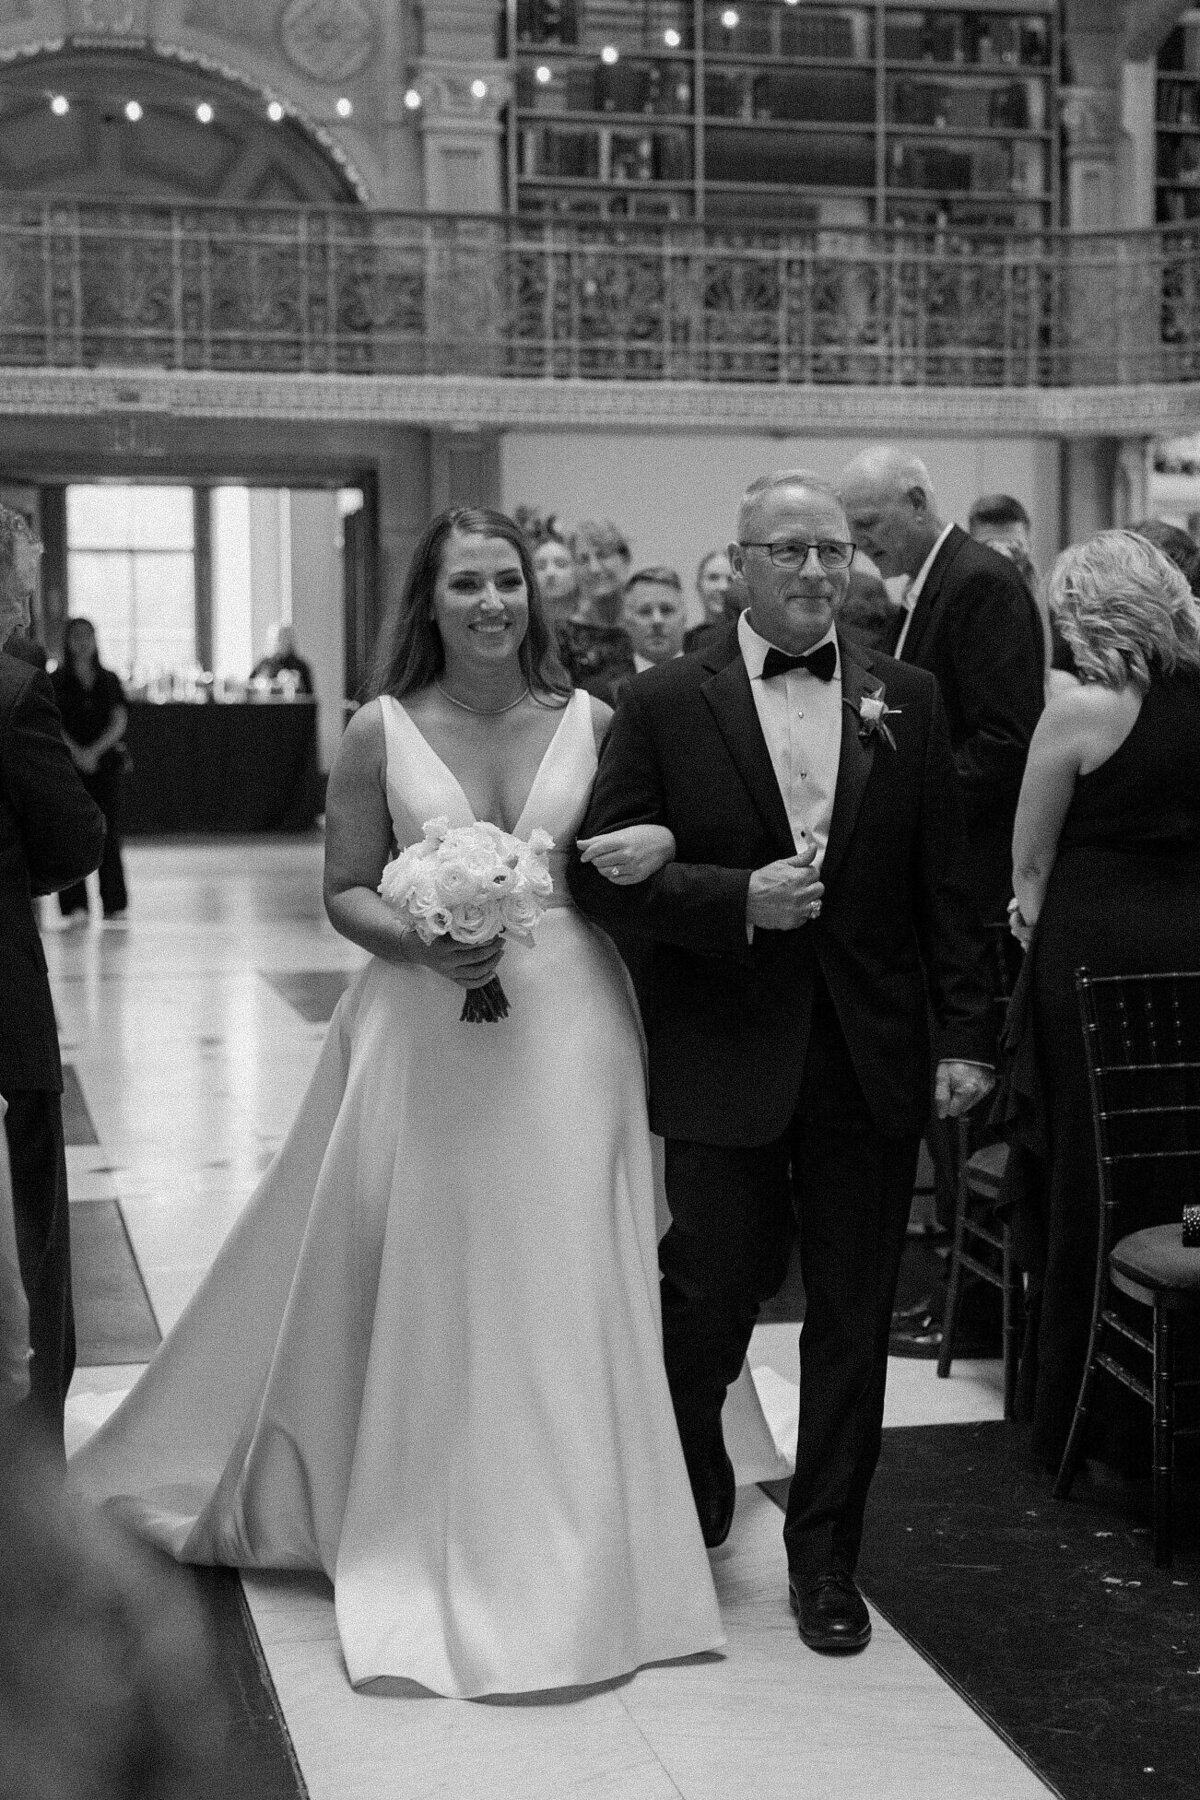 Event-Planning-DC-Wedding-George-Peabody-Library-Processional-Bride-Dad-Anna-Lowe-Photography-